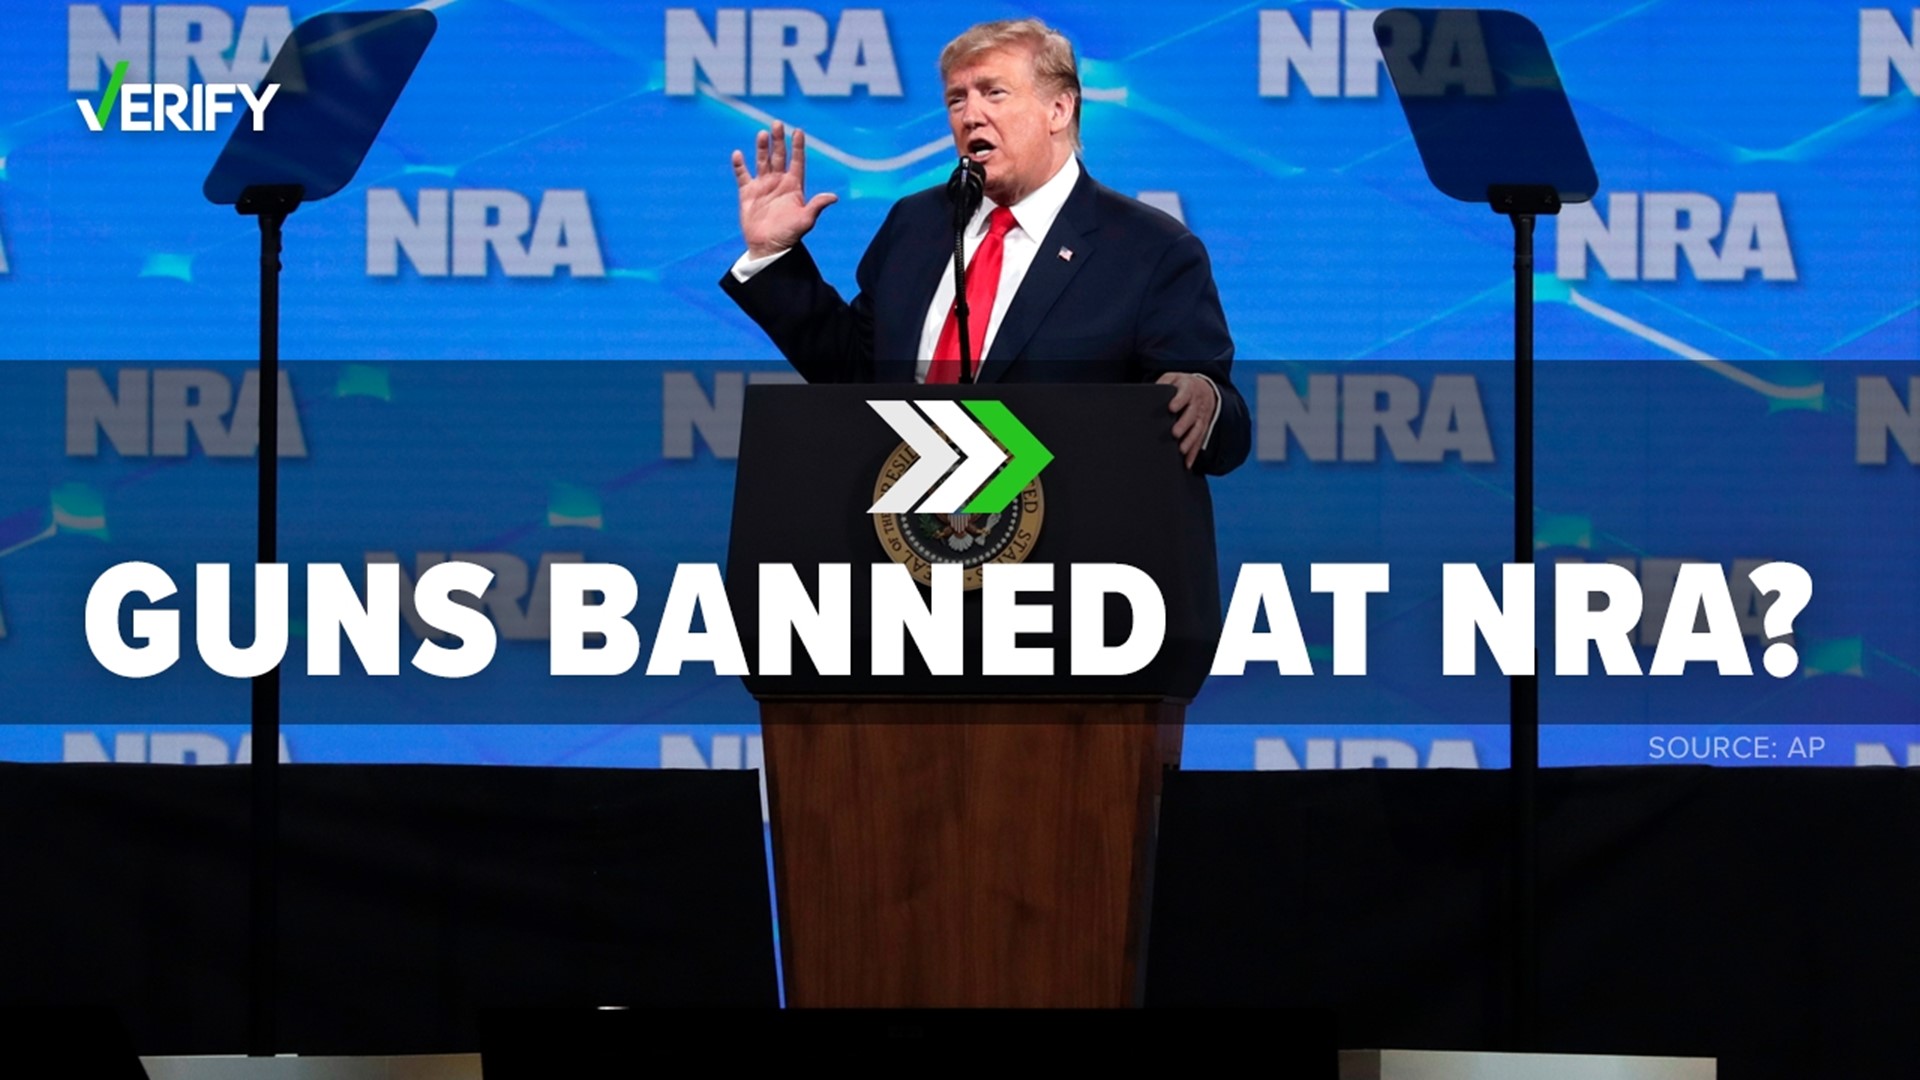 The NRA did not ban guns from their annual meeting, but the Secret Service says guns can’t be carried where and when former President Donald Trump will be speaking.